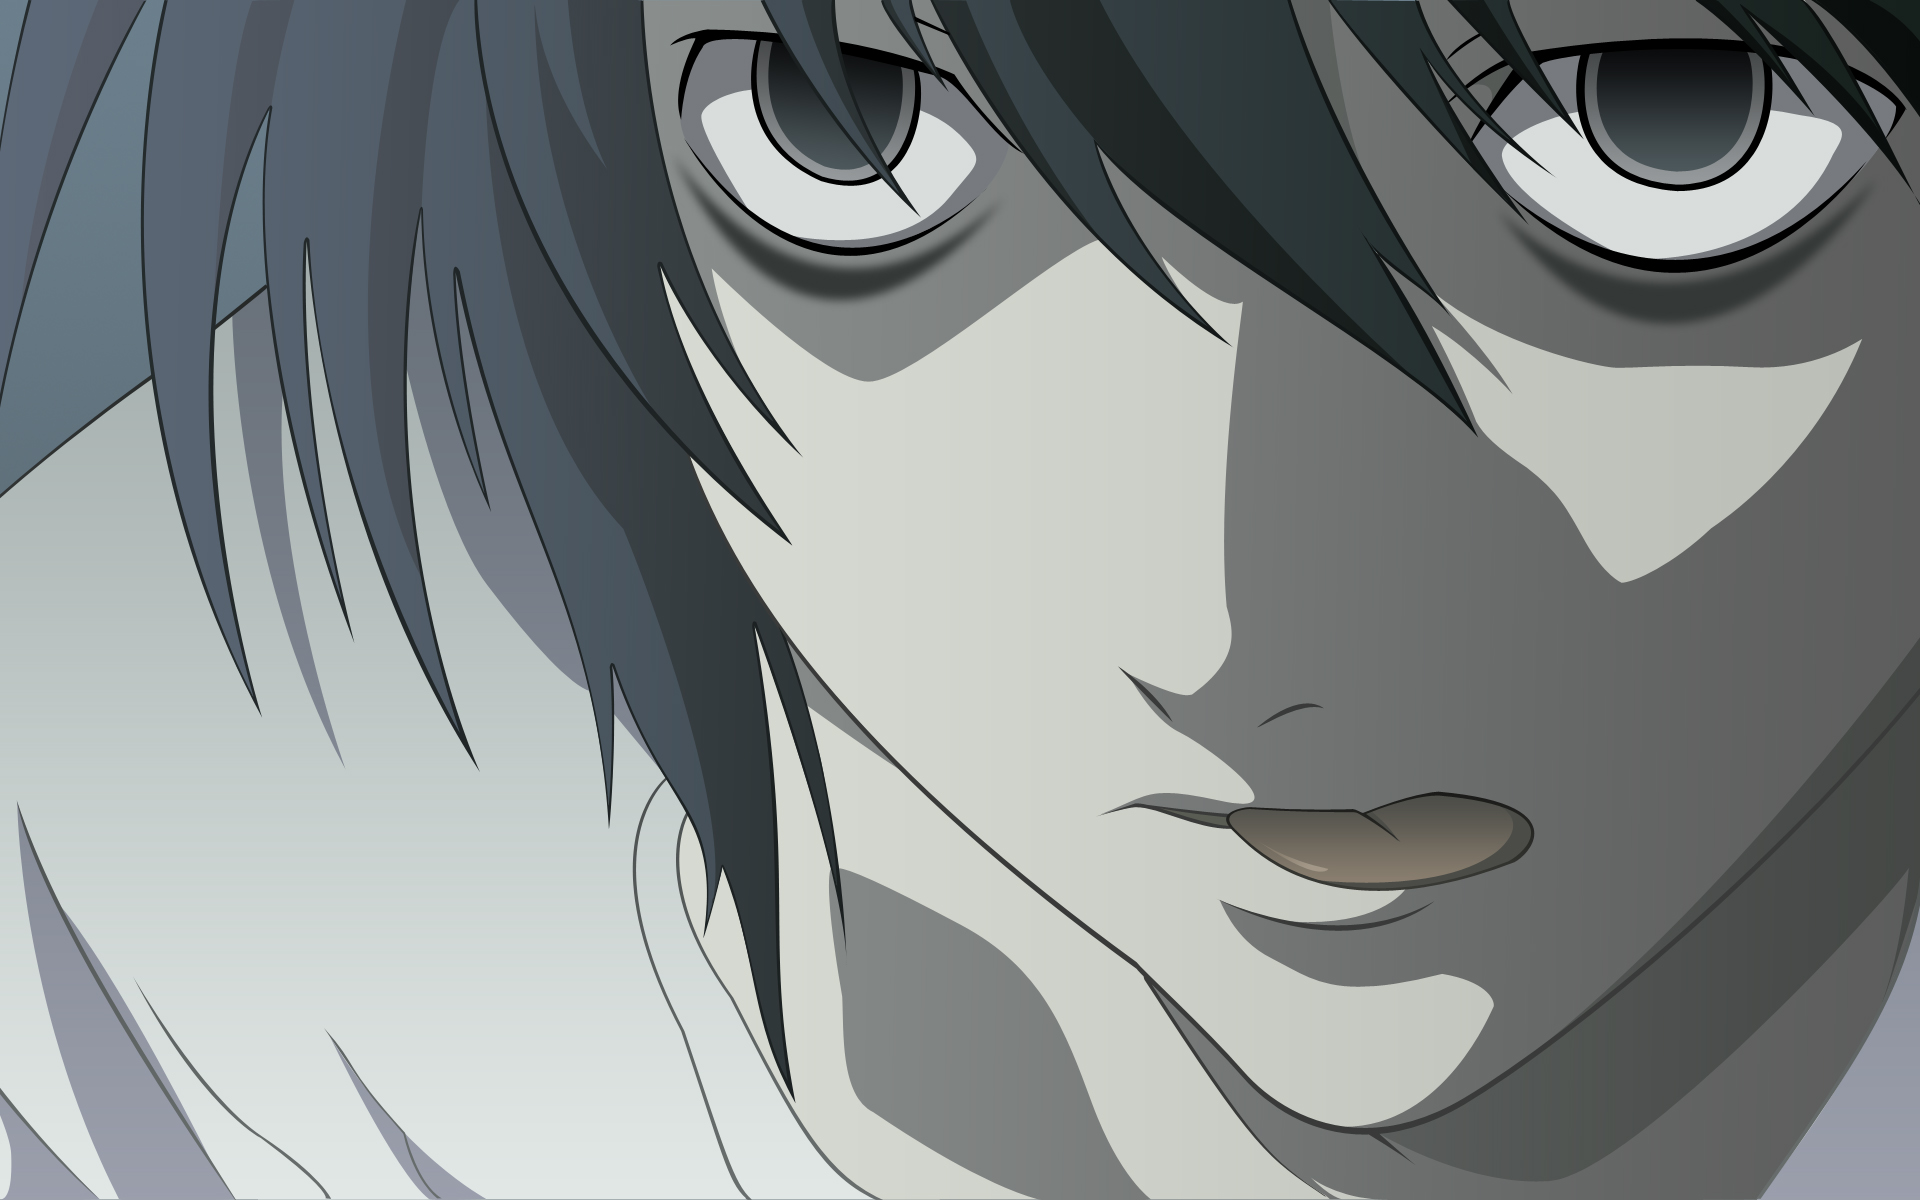 anime, death note, l (death note)